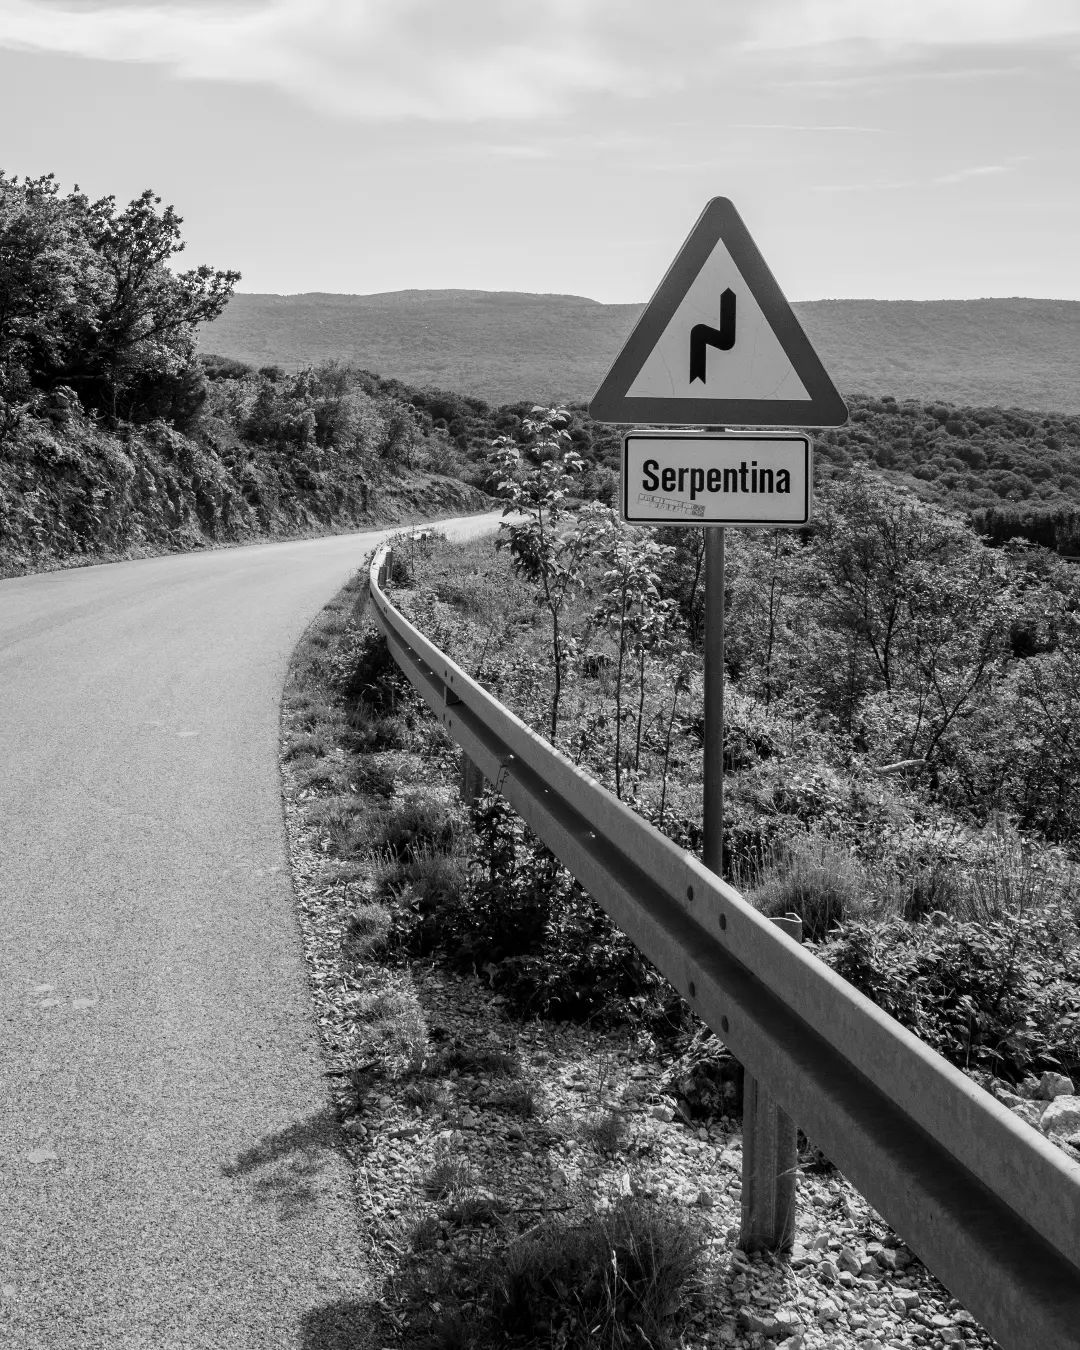 So, what's next? What can you expect from 2023 edition? For sure there will be a lot of climbing, a lot of crazy off-road and something new to spice up the experience 💚🐍

📸 @foto.nico.la

.
.
.

#serpentsarerising #sevenserpentsgravel #7SG2022 #wiliertriestina #raisethebar #pasol #vivifuori #infini #movinginstyle #bikepacking #bikepackinglife #cyclingadventures #ultracycling #cycling  #gravel #gravelgrinder #ridegravel #outsideisfree #naturelovers #cyclingshots